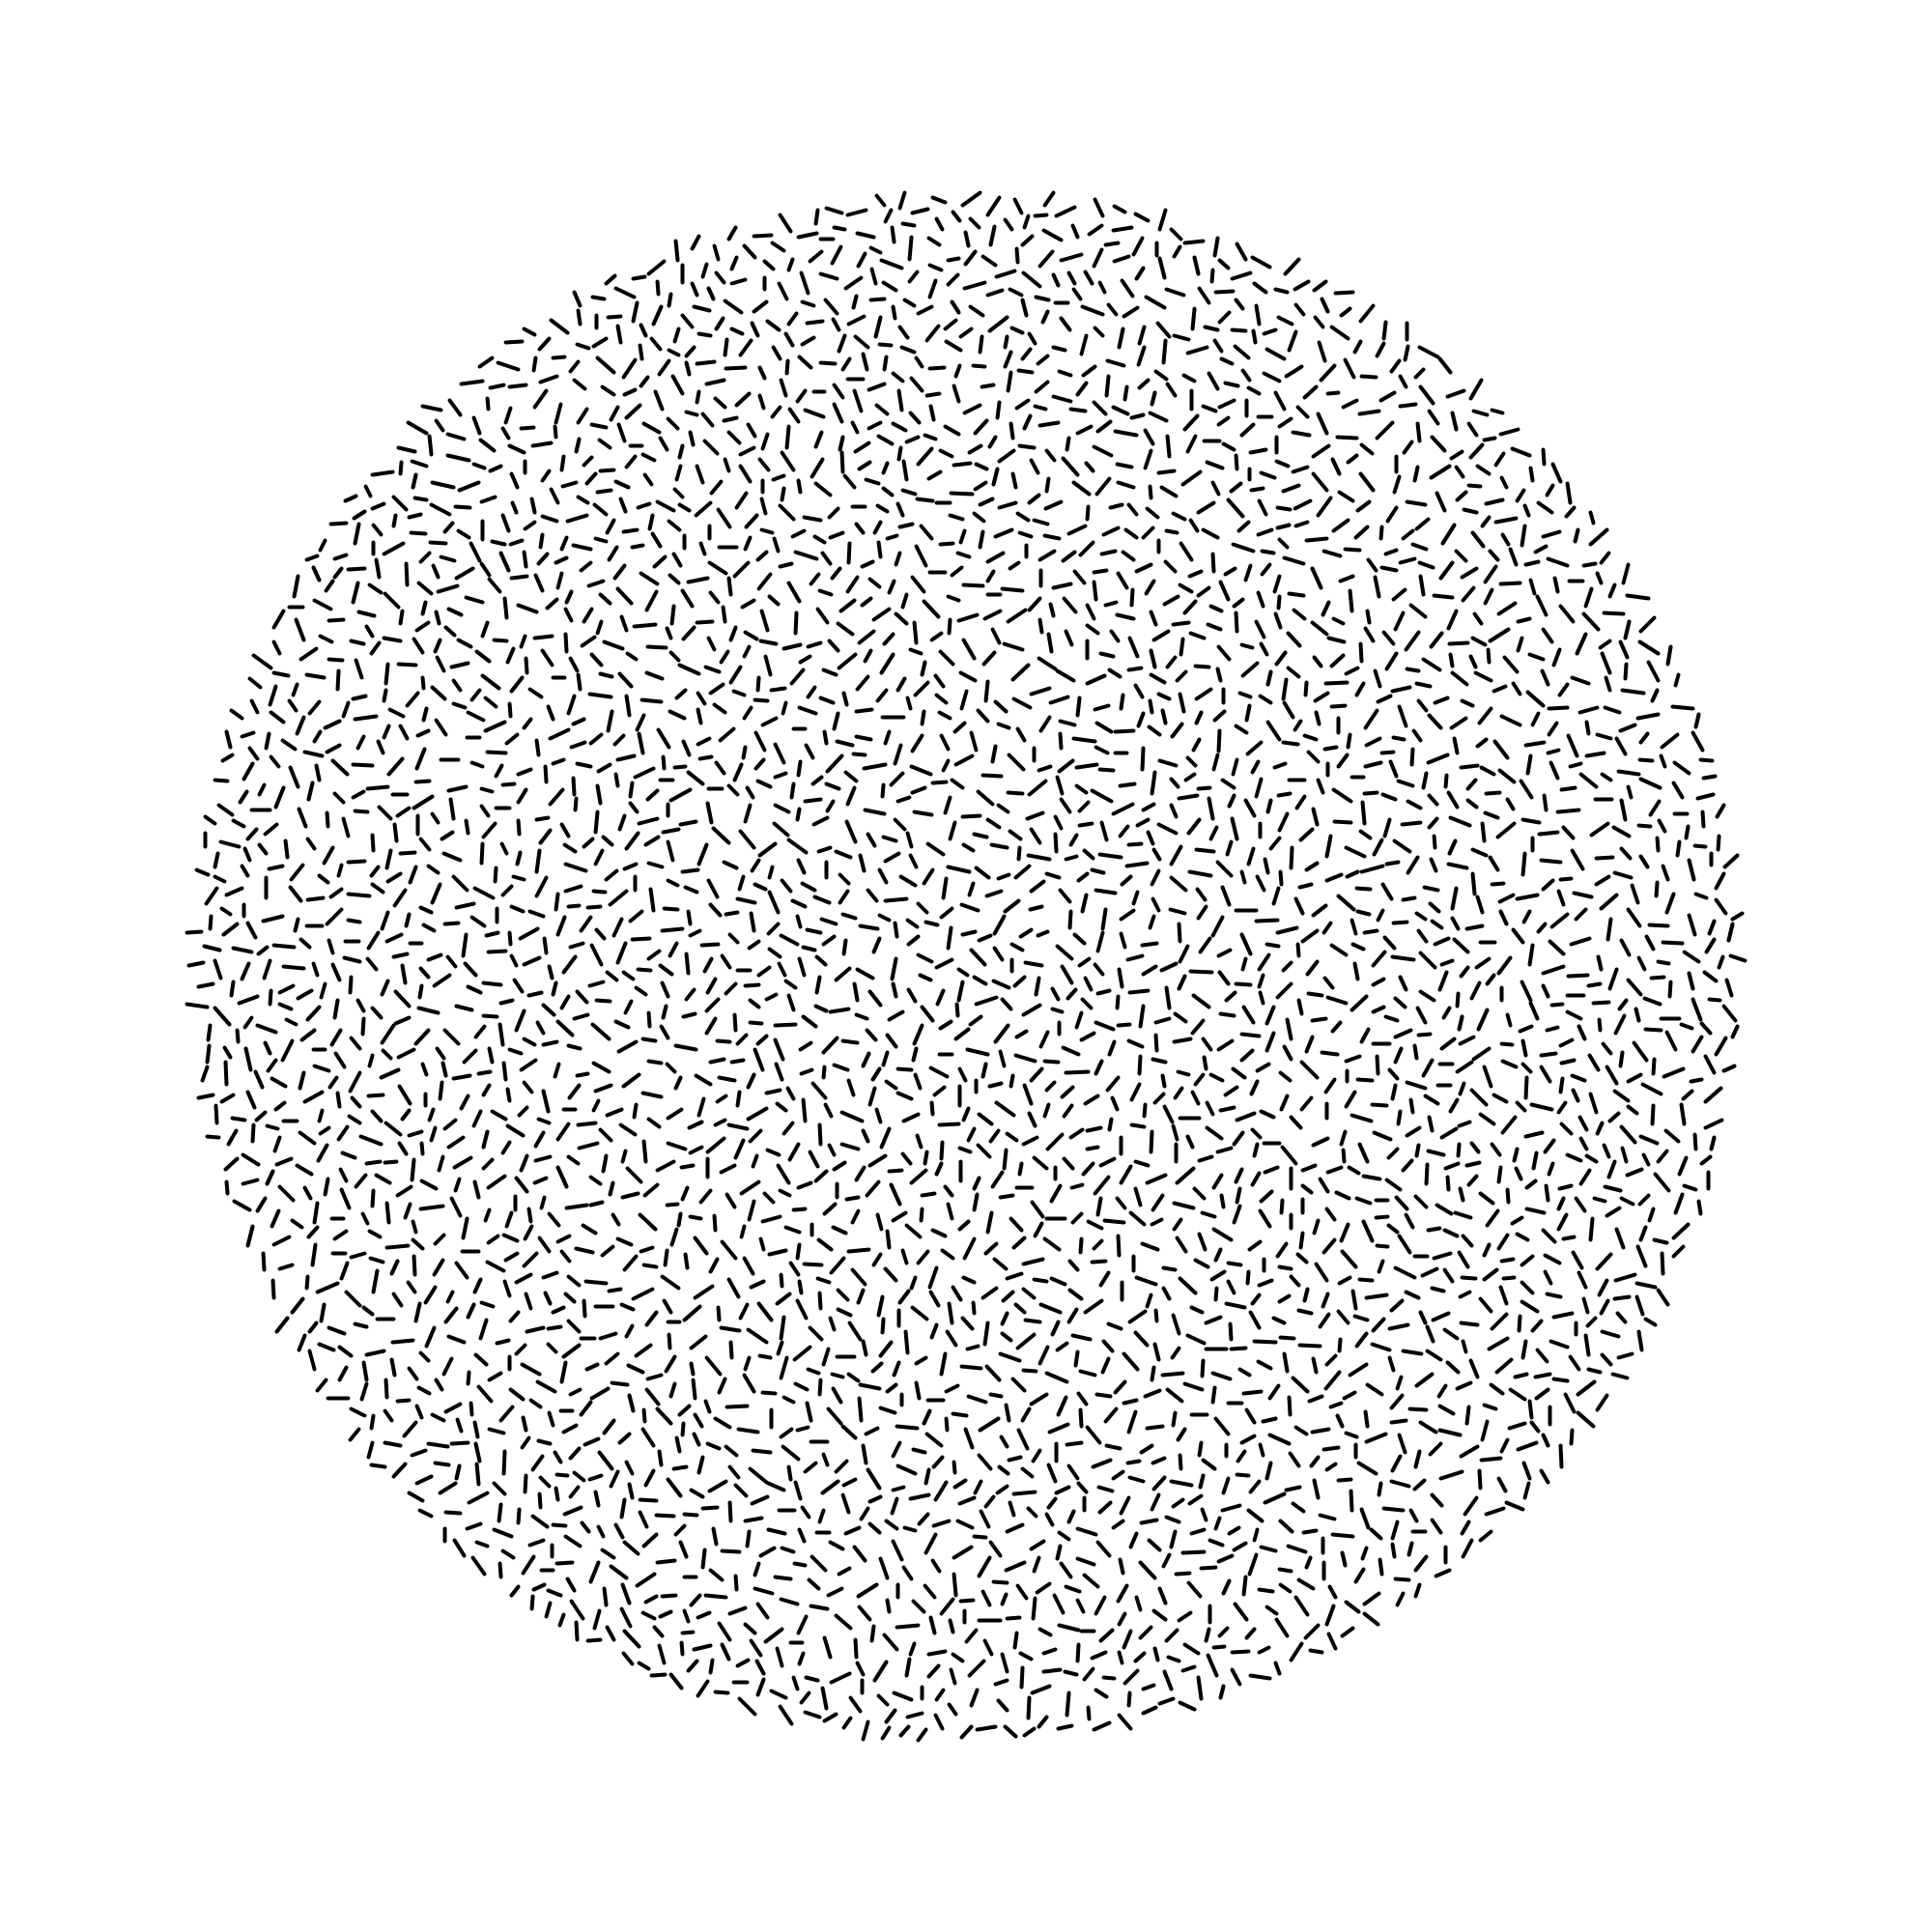 A generative art piece that demonstrates filling a circle with dashed lines